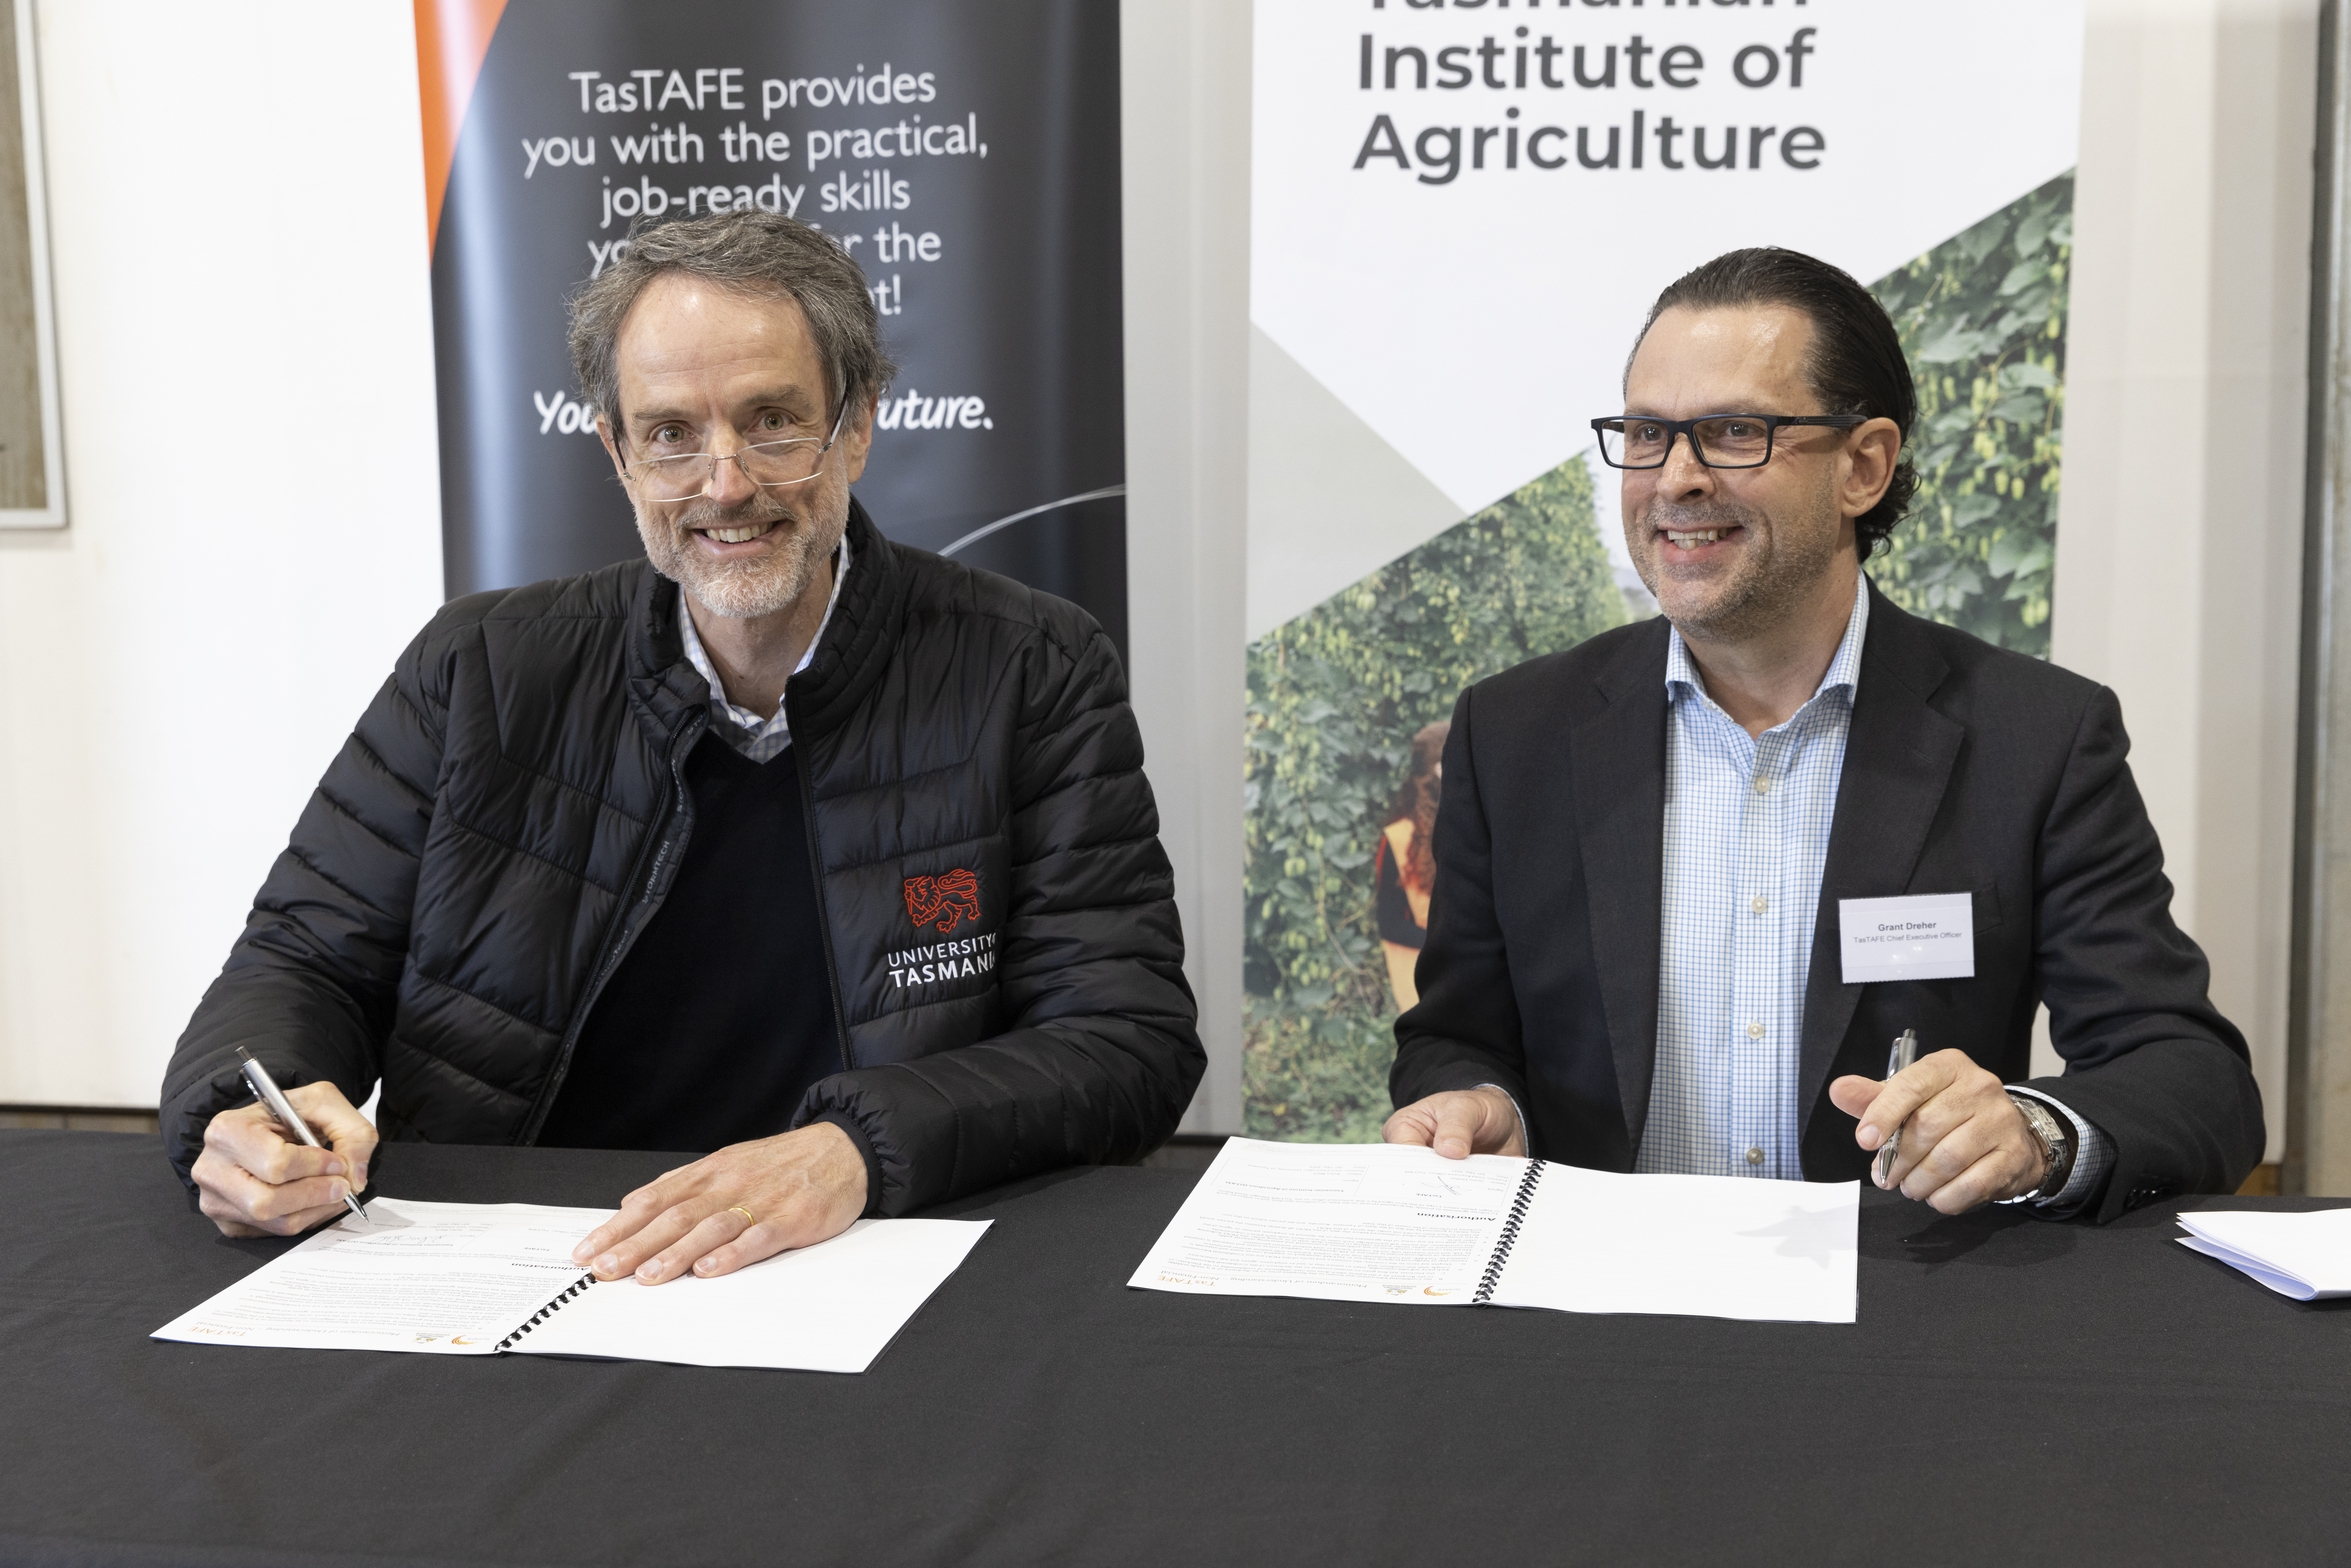 TasTAFE CEO Grant Dreher and University of Tasmania Vice Chancellor Rufus Black signing documents at a table